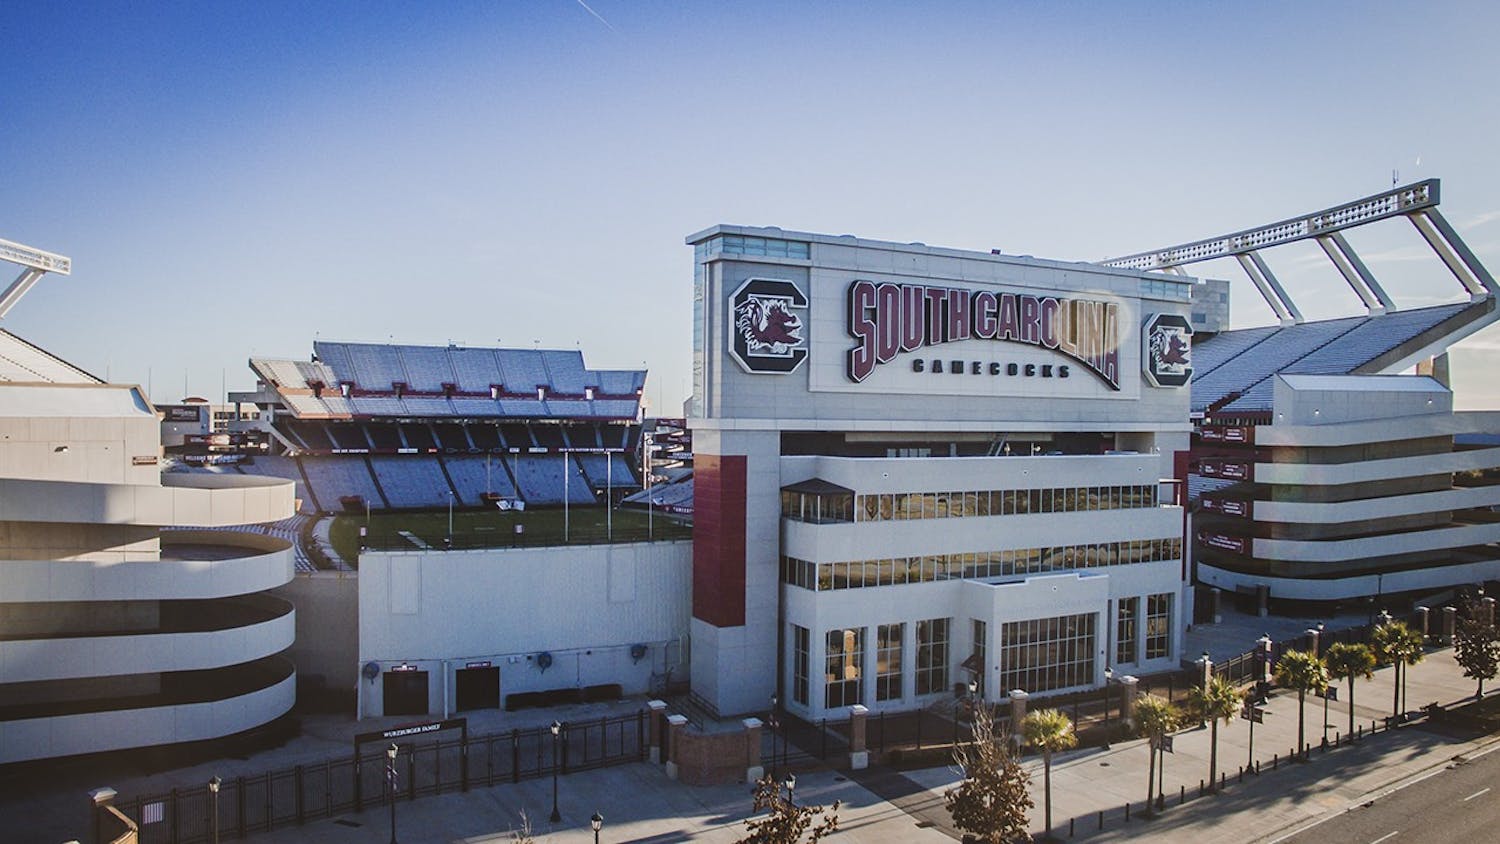 Williams-Brice Stadium sits only minutes from the University of South Carolina campus.